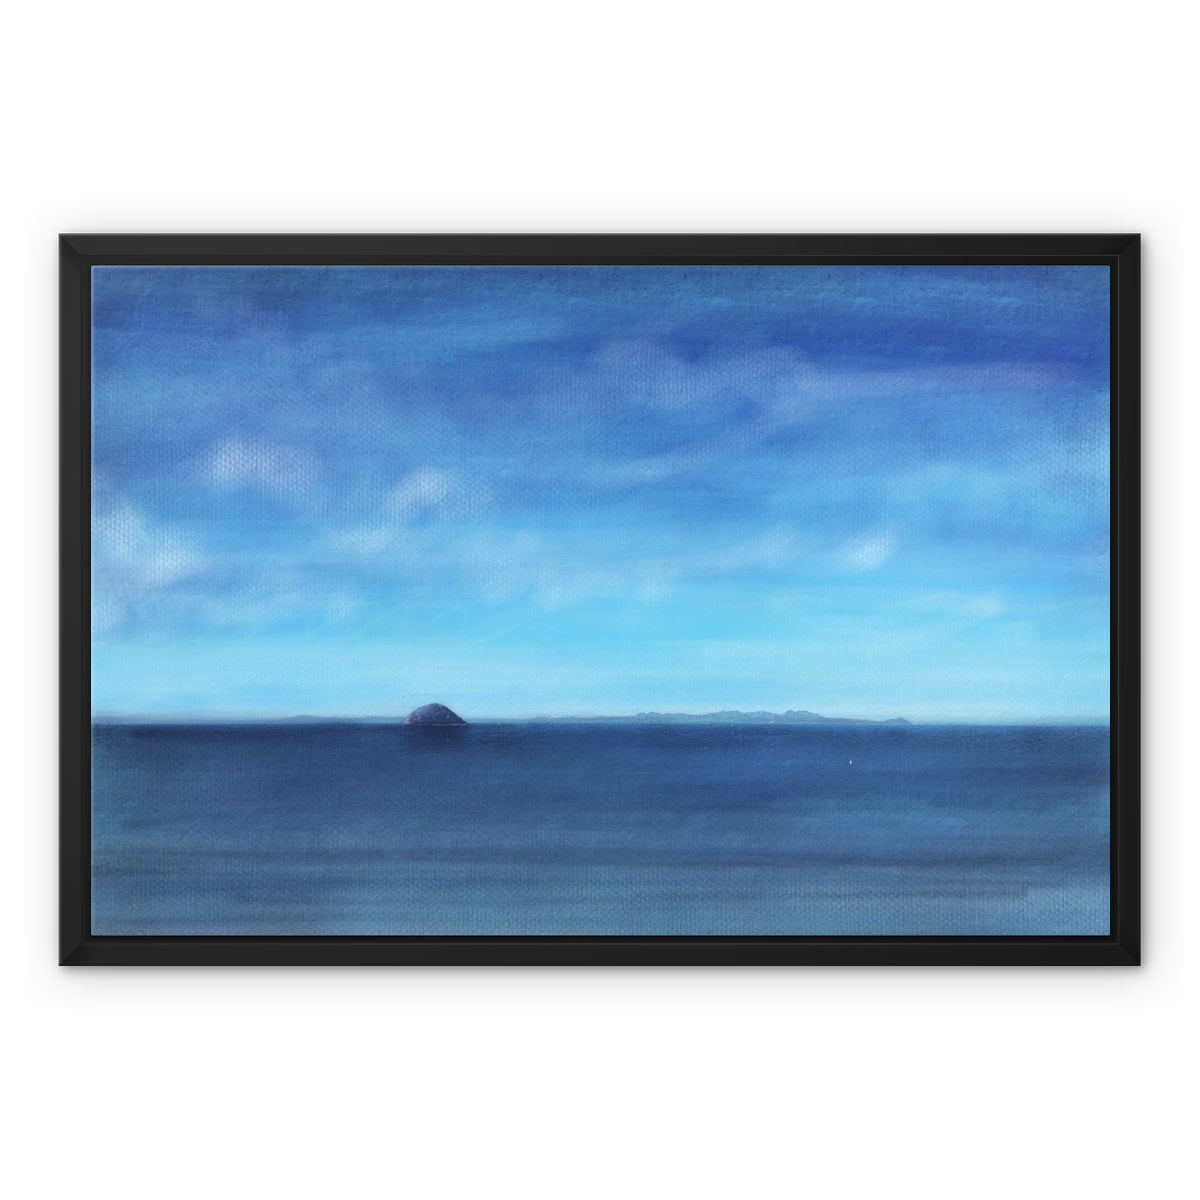 Ailsa Craig & Arran Painting | Framed Canvas From Scotland-Floating Framed Canvas Prints-Arran Art Gallery-24"x18"-Black Frame-Paintings, Prints, Homeware, Art Gifts From Scotland By Scottish Artist Kevin Hunter